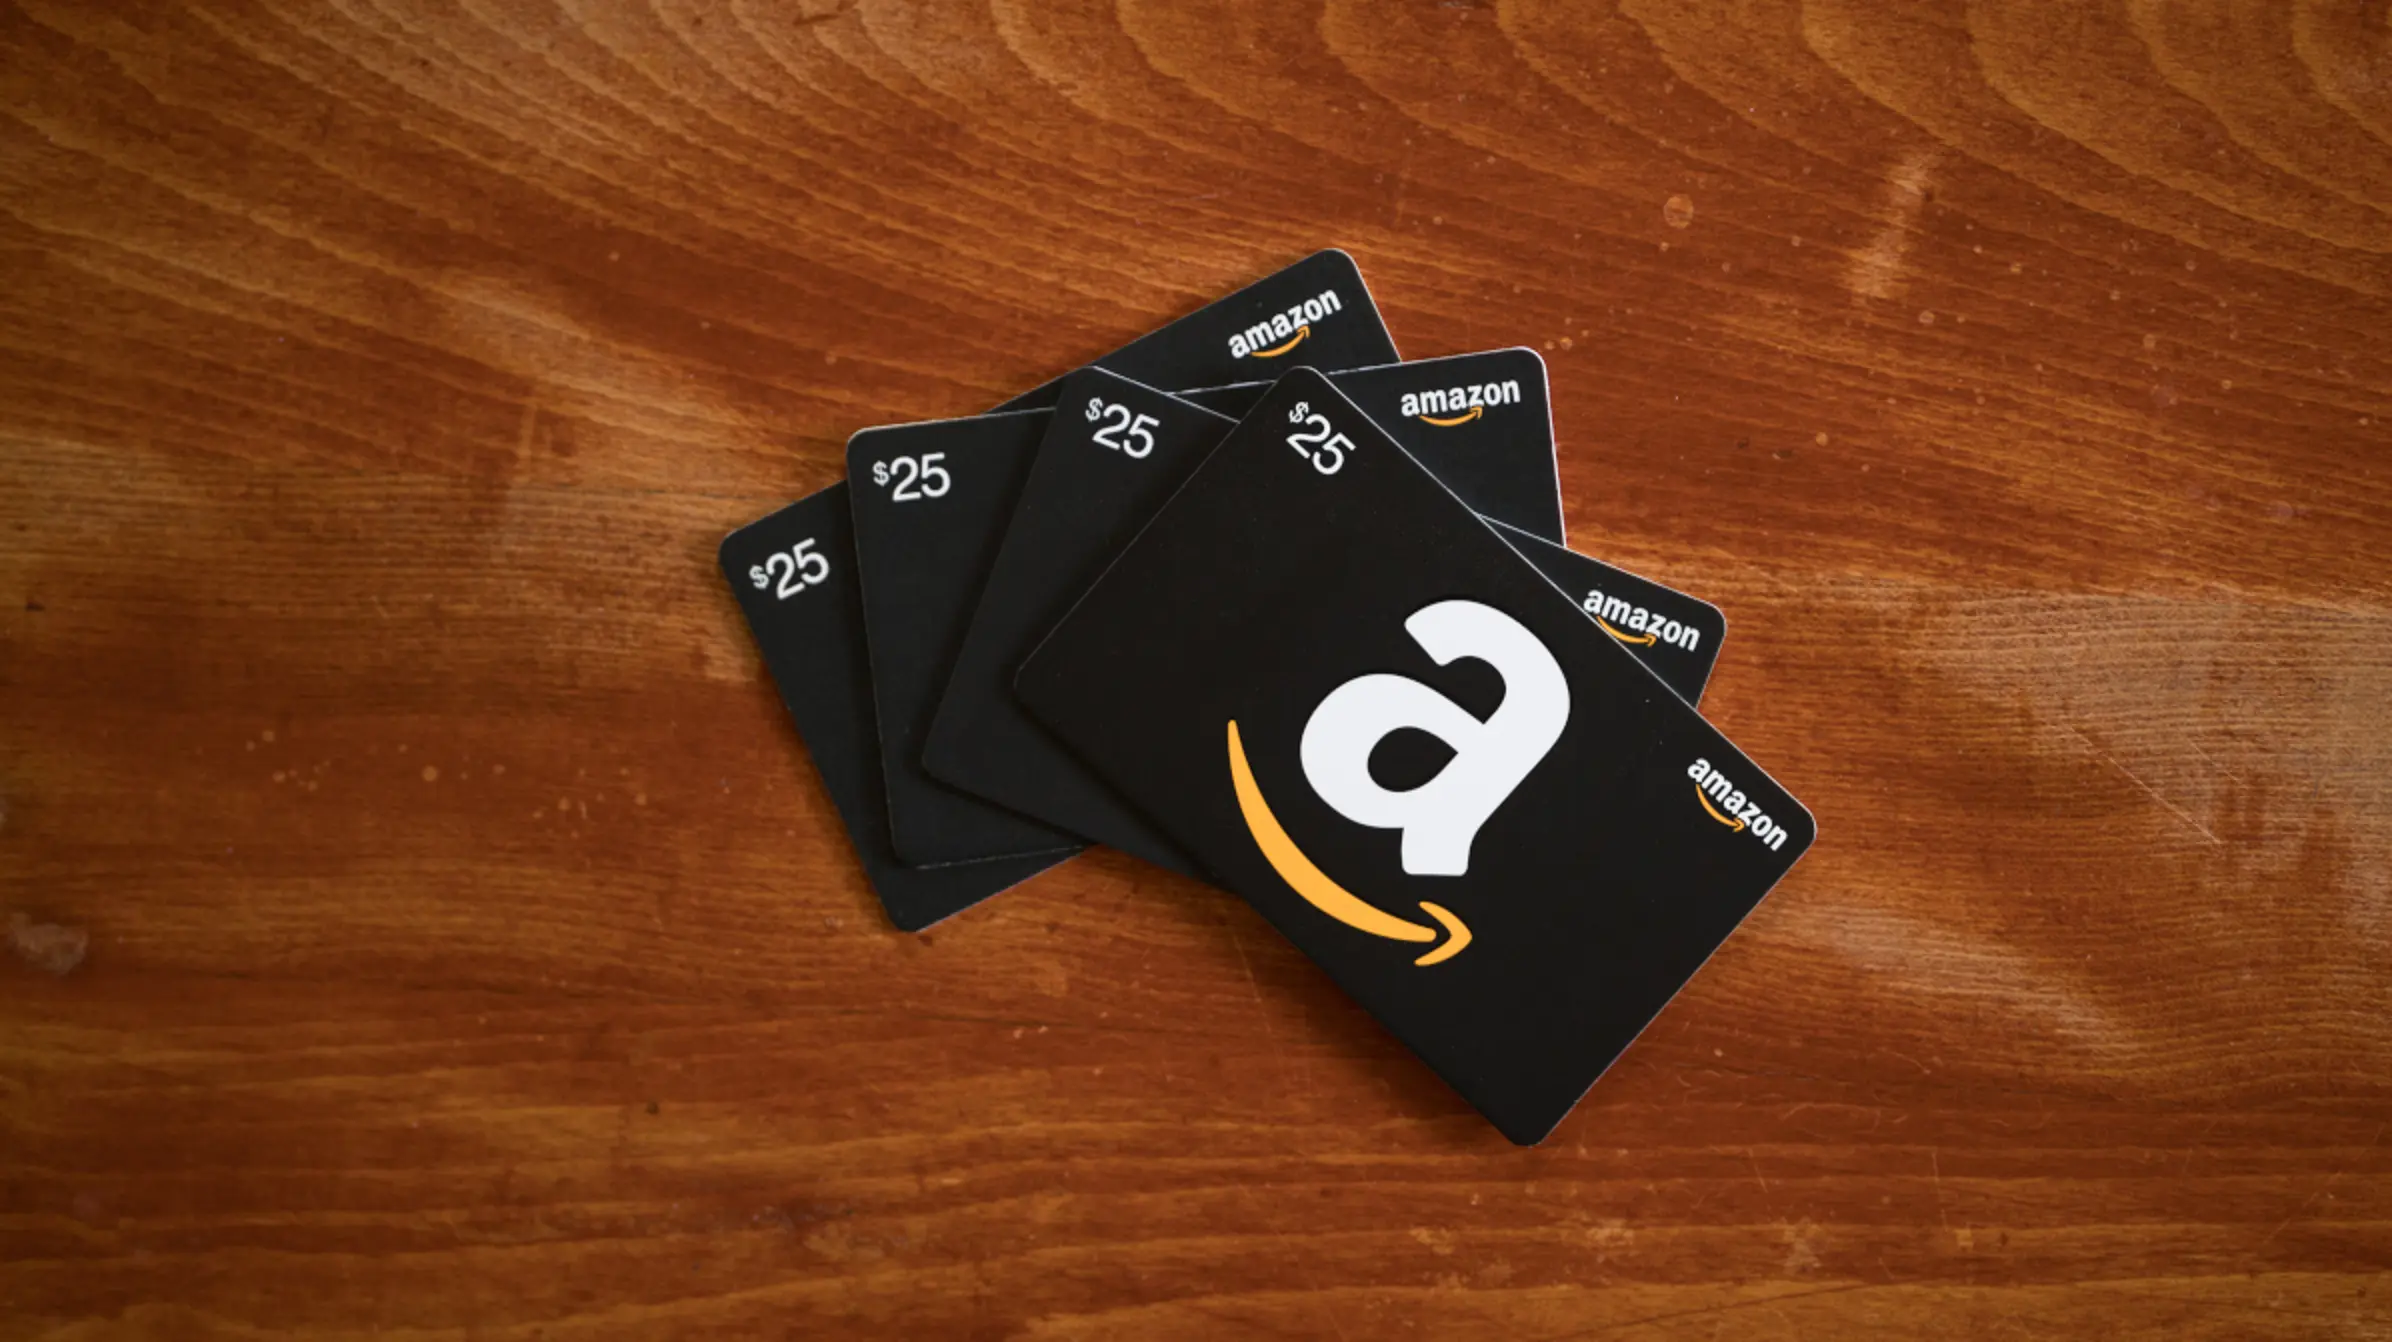 Where can I use Amazon gift card